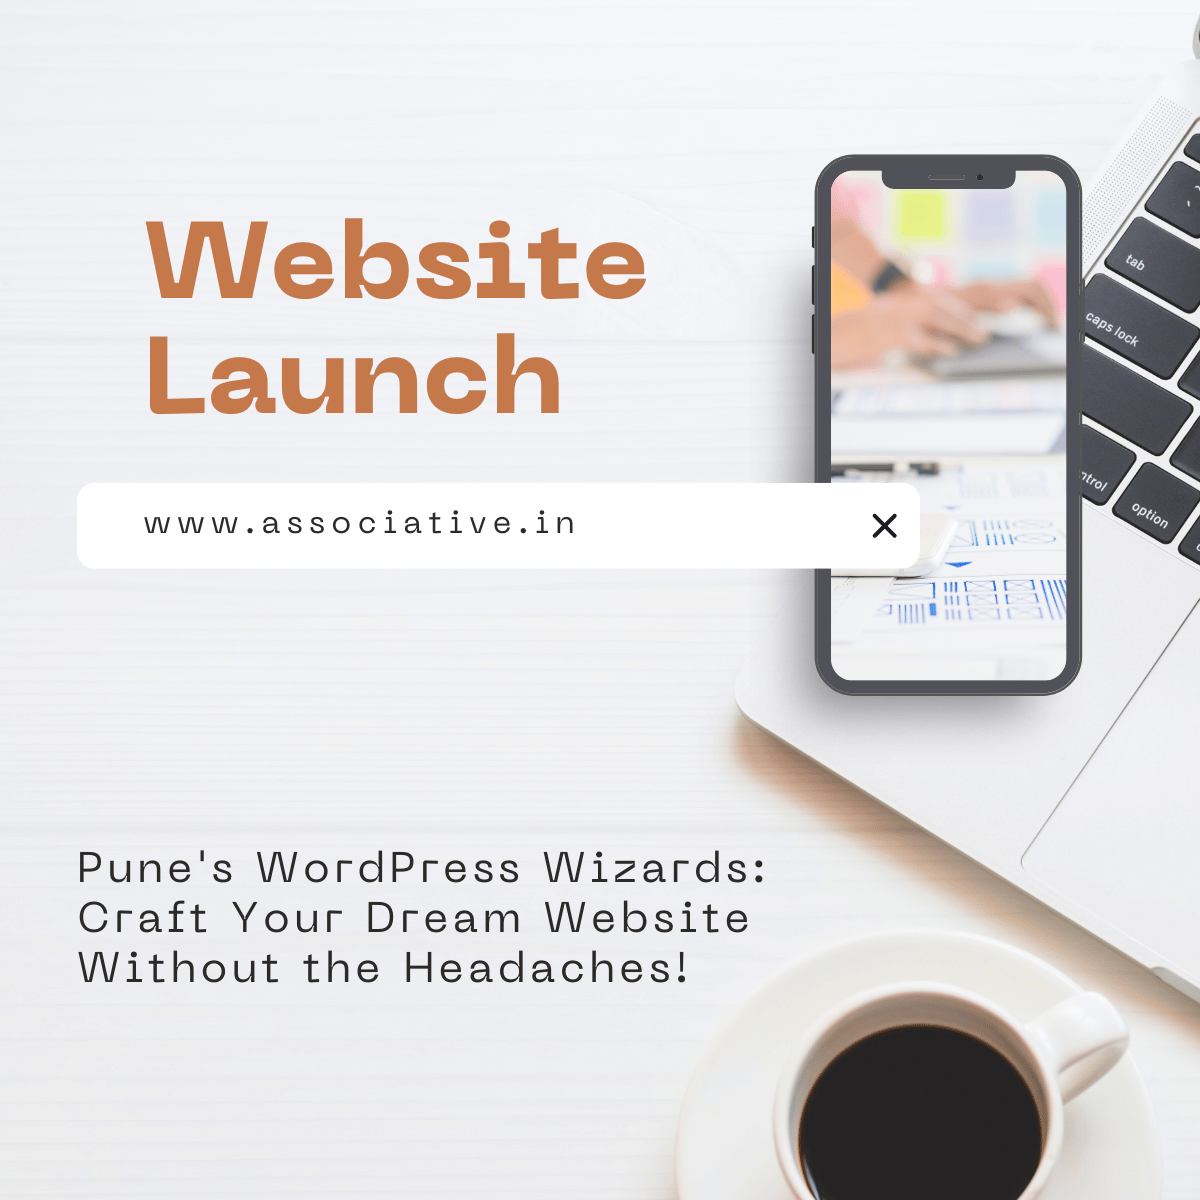 Pune's WordPress Wizards: Craft Your Dream Website Without the Headaches!